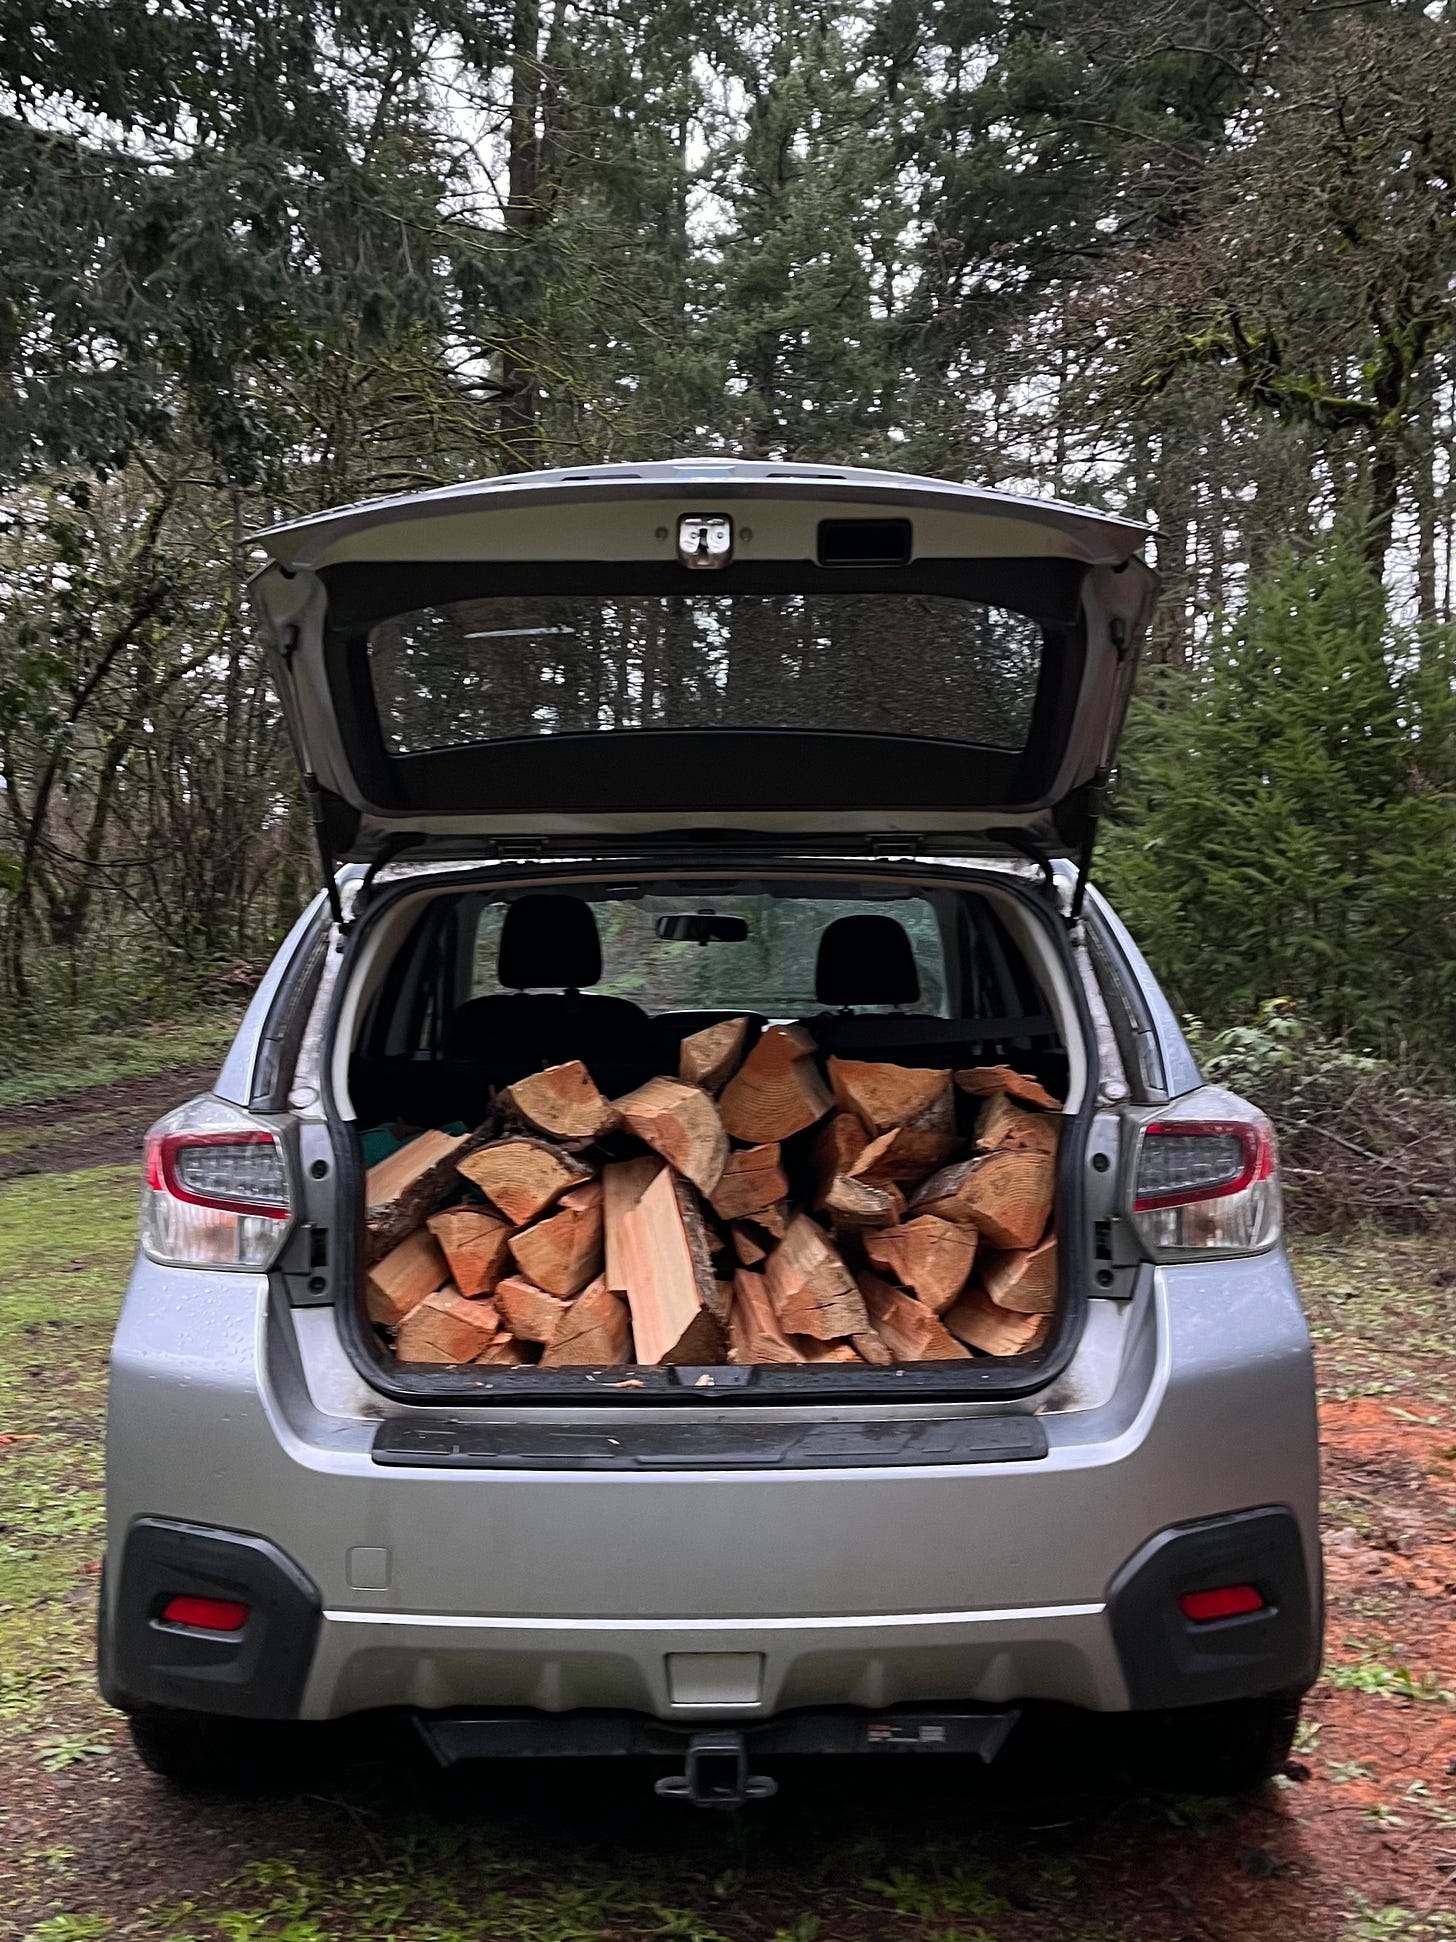 The open hatchback of a silver Subaru in a wooded clearing, full up with freshly chopped firewood